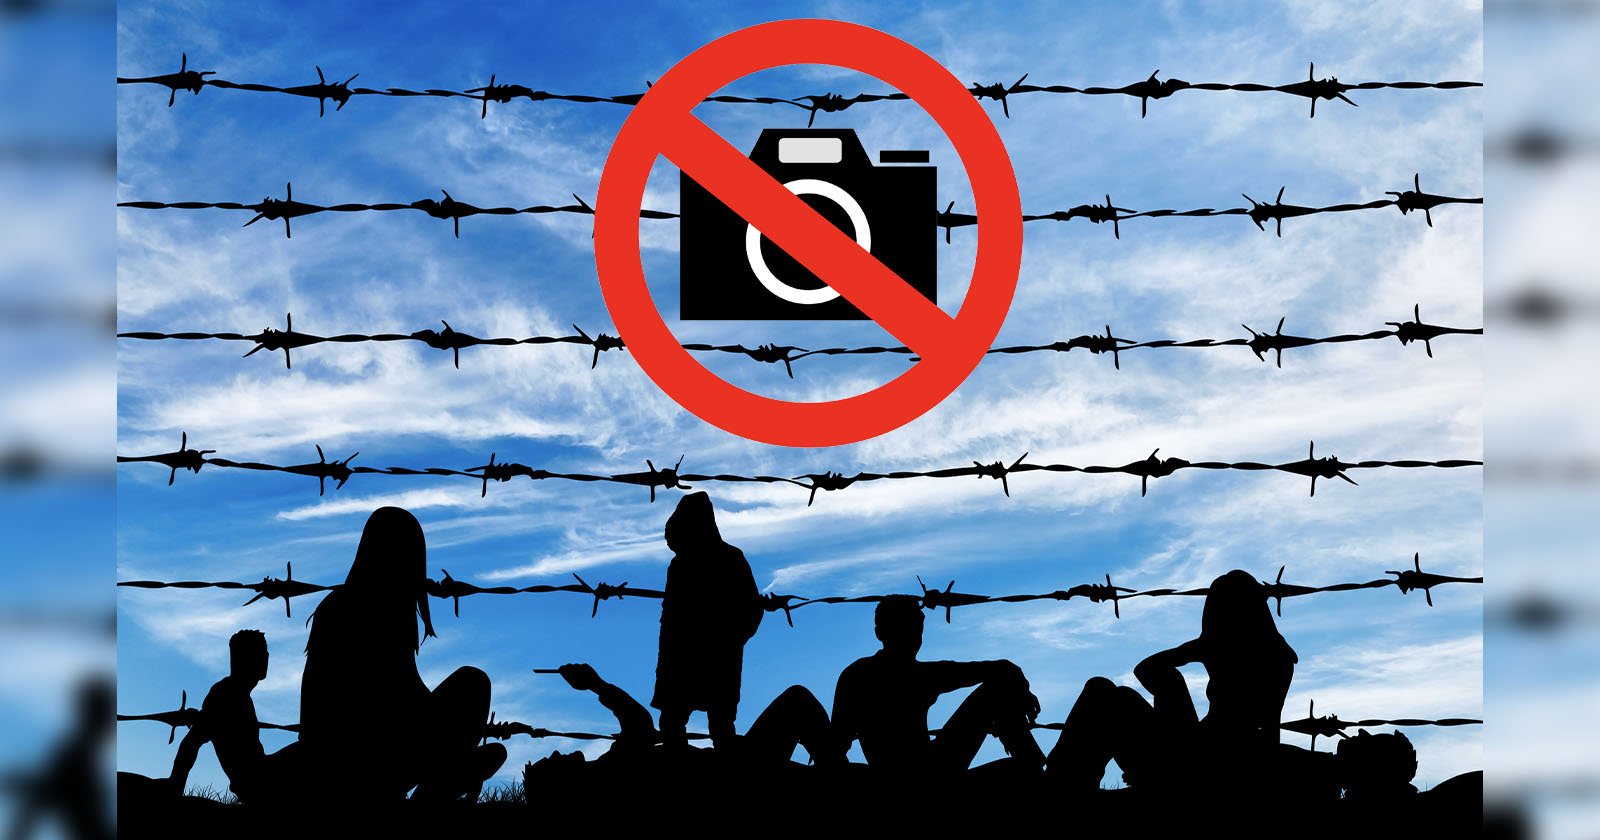 Pultizer Photographer is Fined Under ‘Gag Law’ While Capturing Migrants | PetaPixel